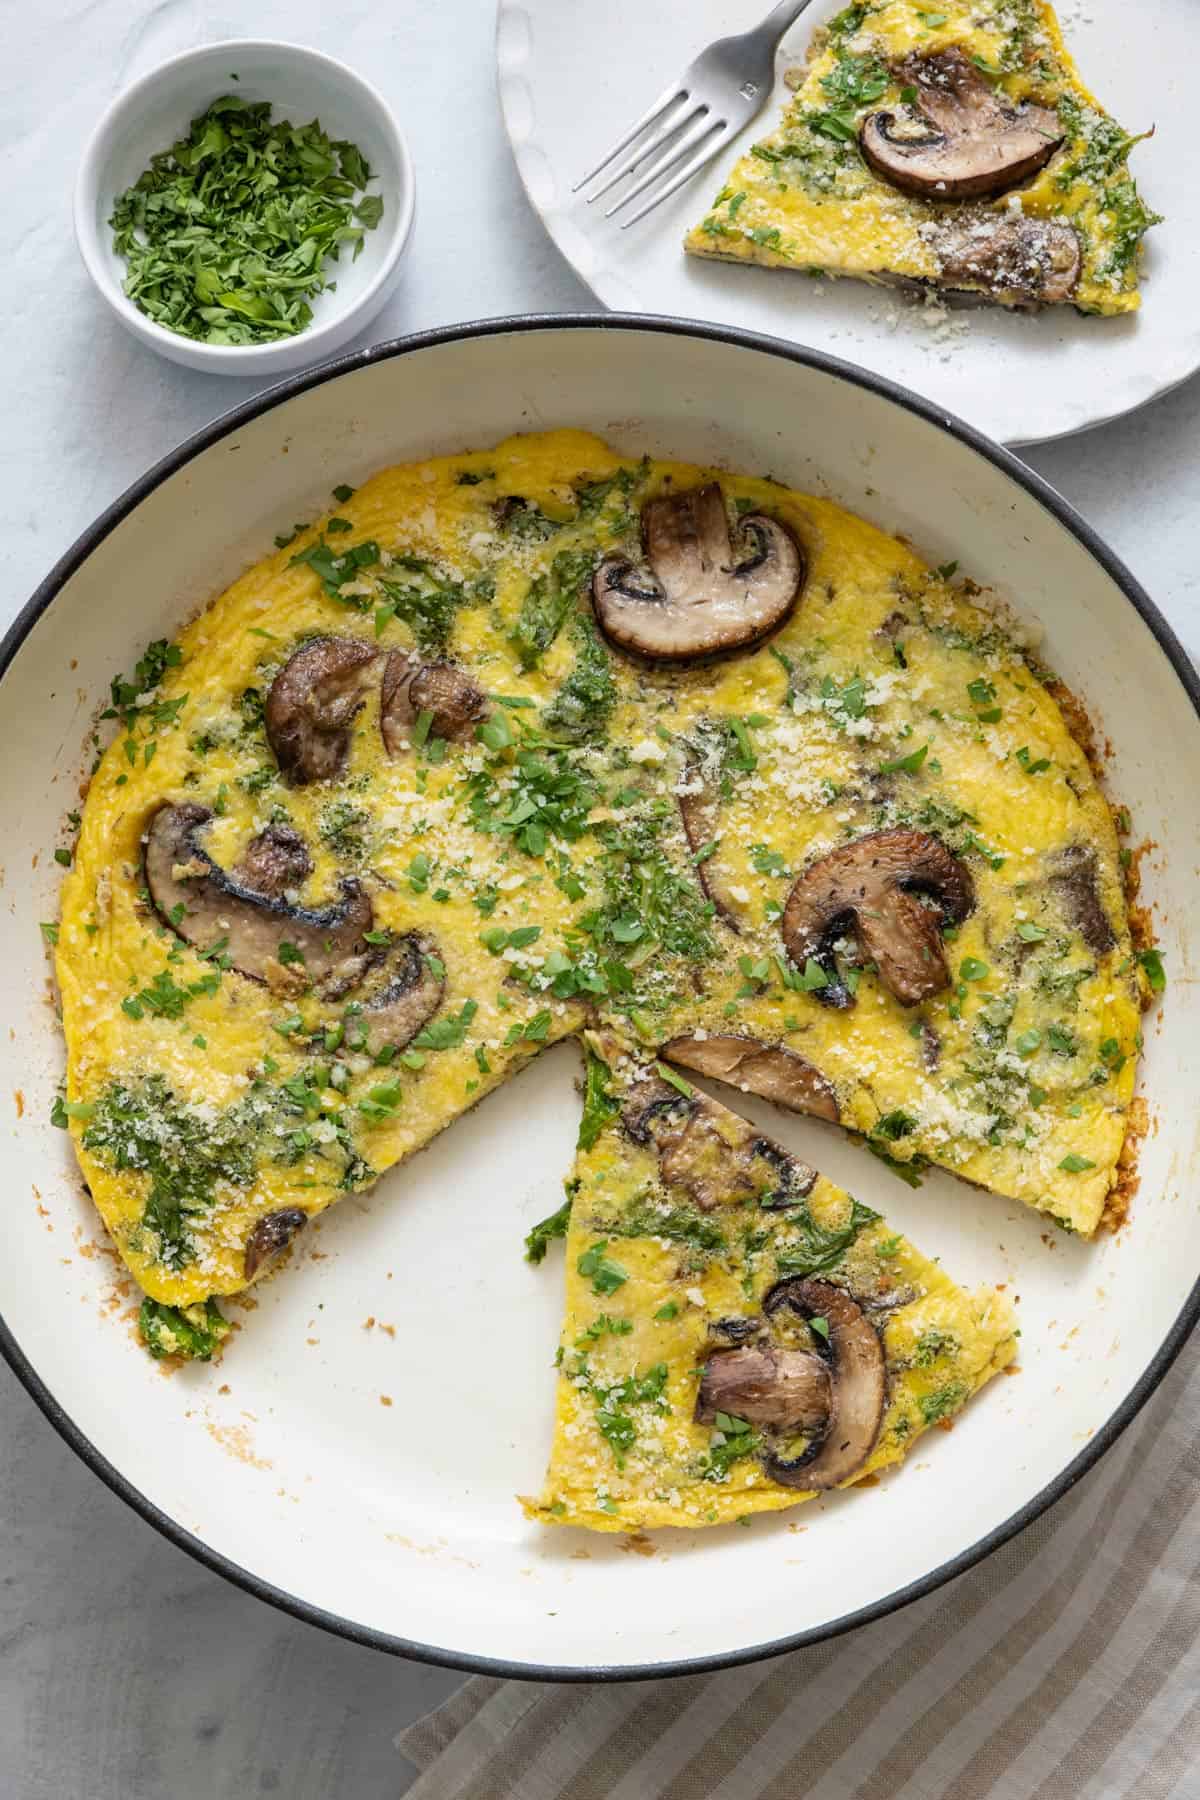 Mushroom frittata with a piece cut out and served on the side.